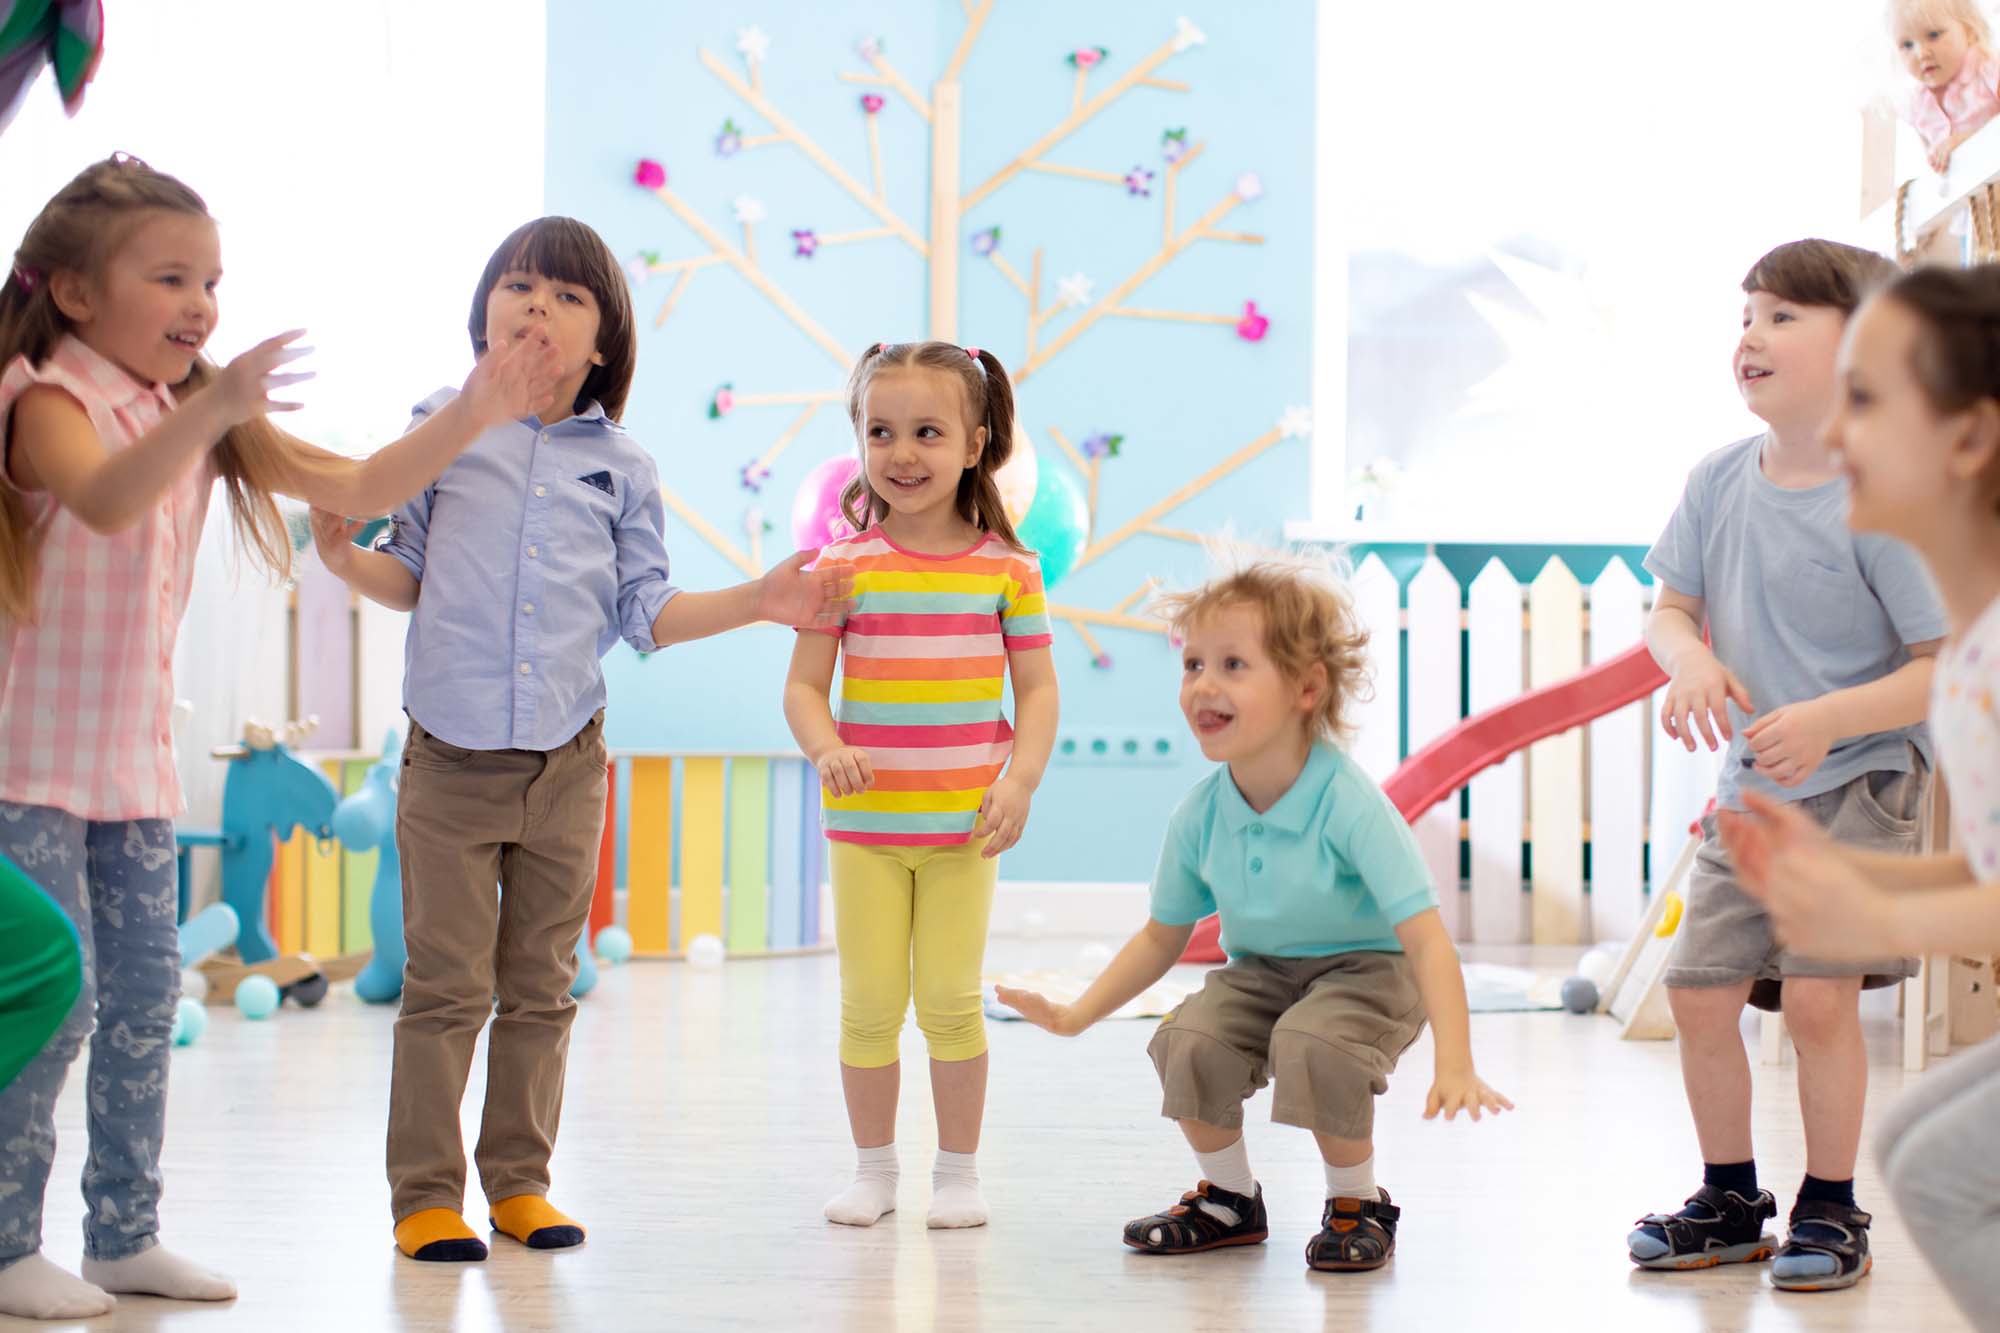 Group of happy children jumping indoor. Kids play together